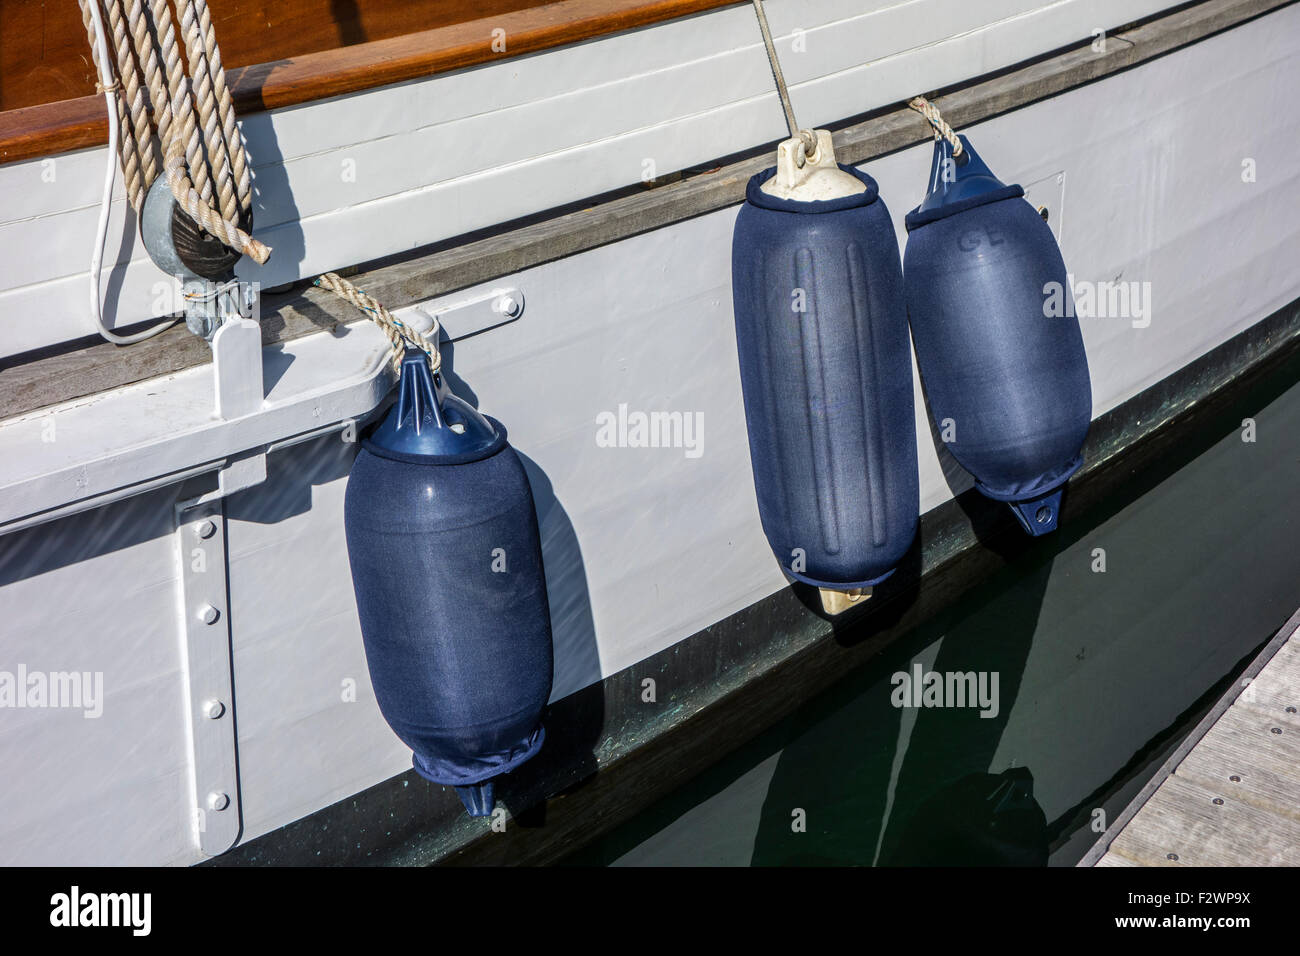 Fenders, used to prevent damage to sailing boat / vessel when berthing against jetty Stock Photo